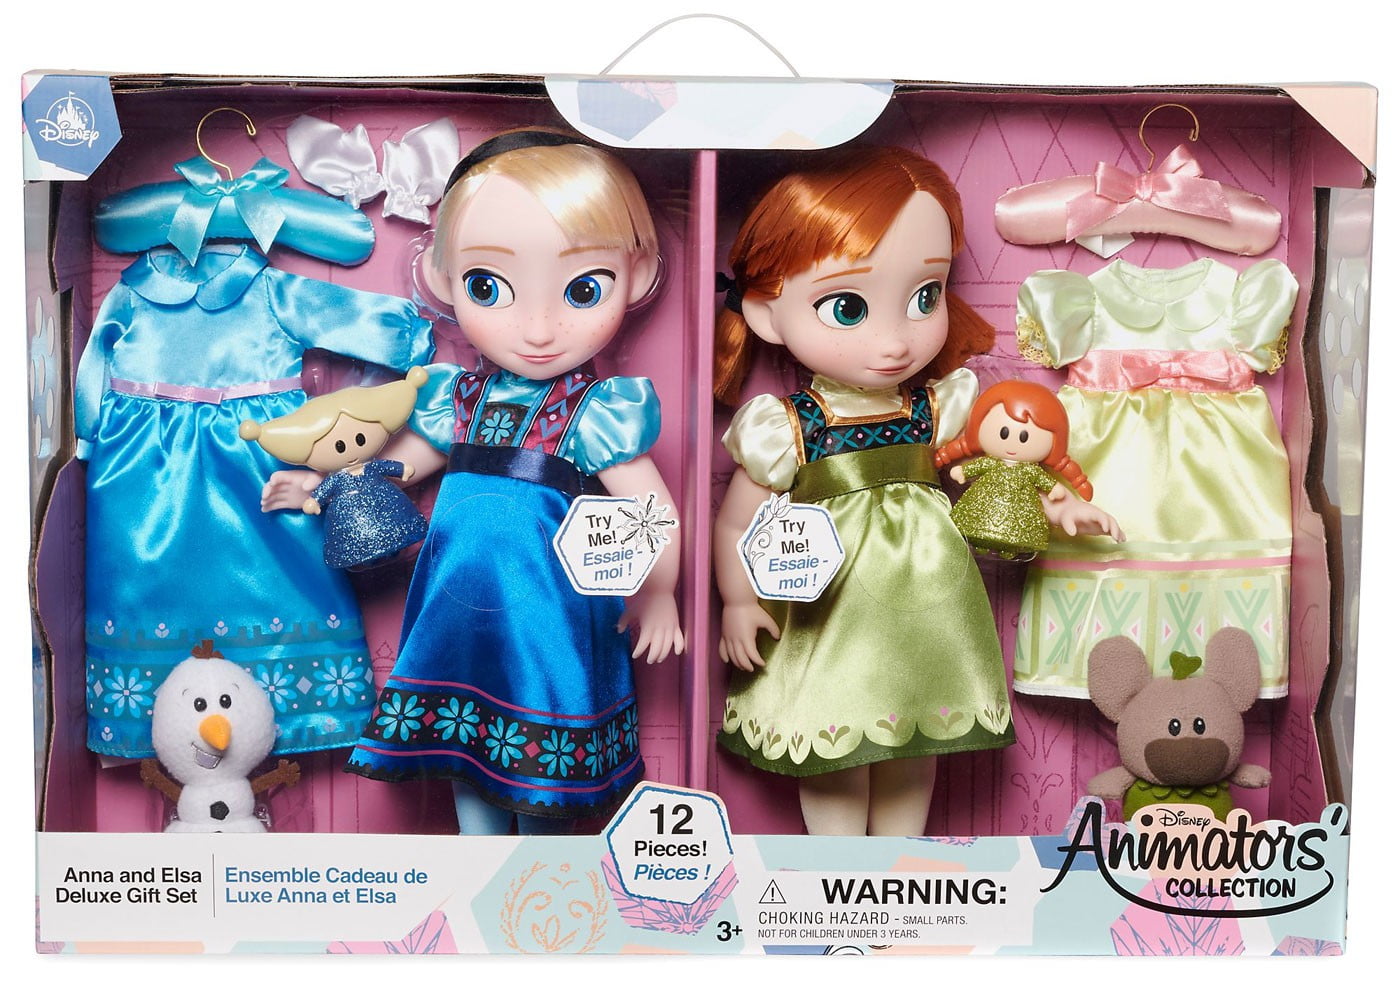 Disney Animators Collection Anna And Elsa Dolls Deluxe Gift Set | My ...